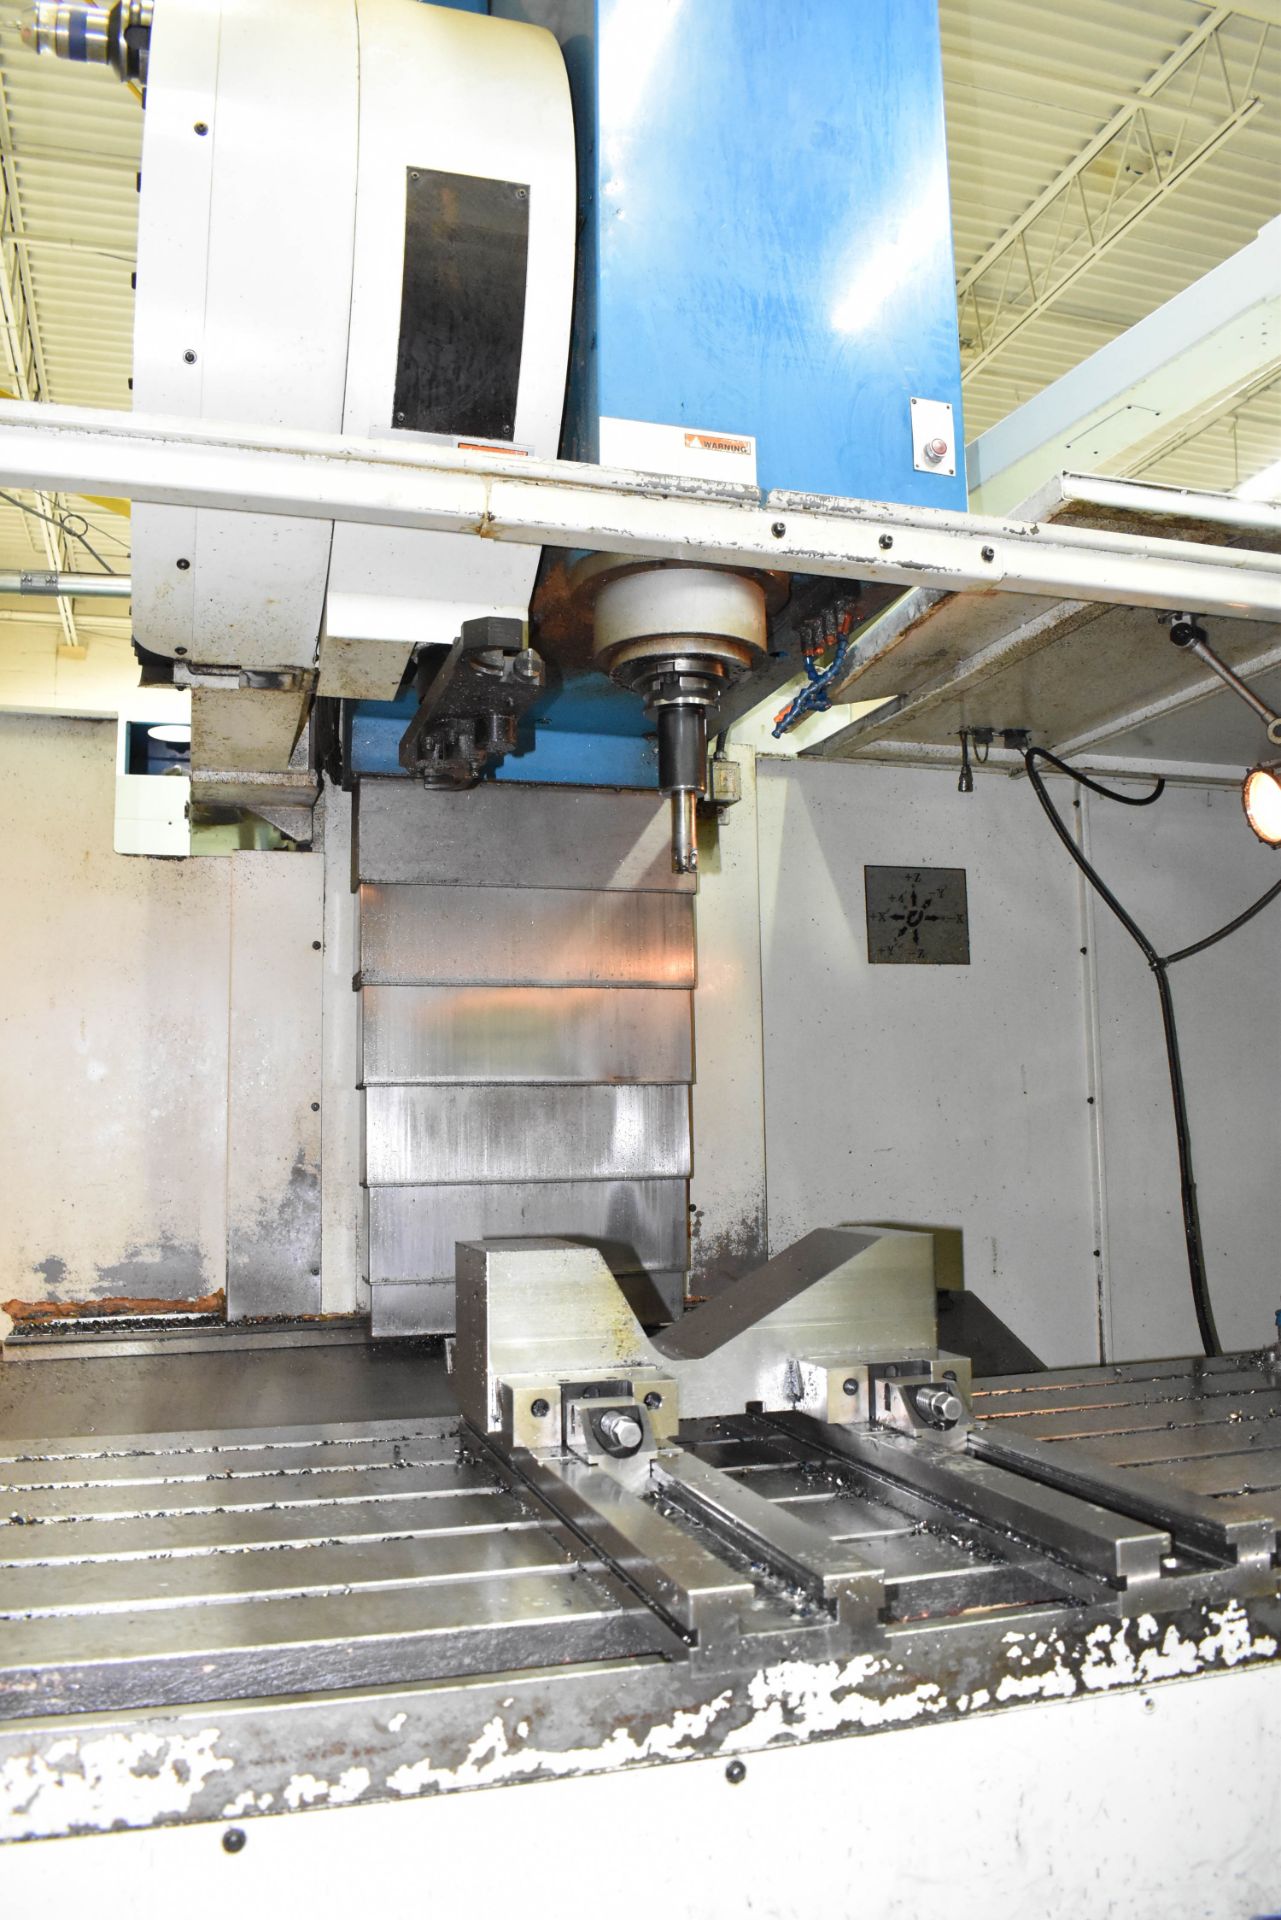 TAKUMI SEIKI (2000) V17A CNC VERTICAL MACHINING CENTER WITH TRAVELS X- 66.9", Y- 33.5", Z- 29.6", - Image 8 of 17